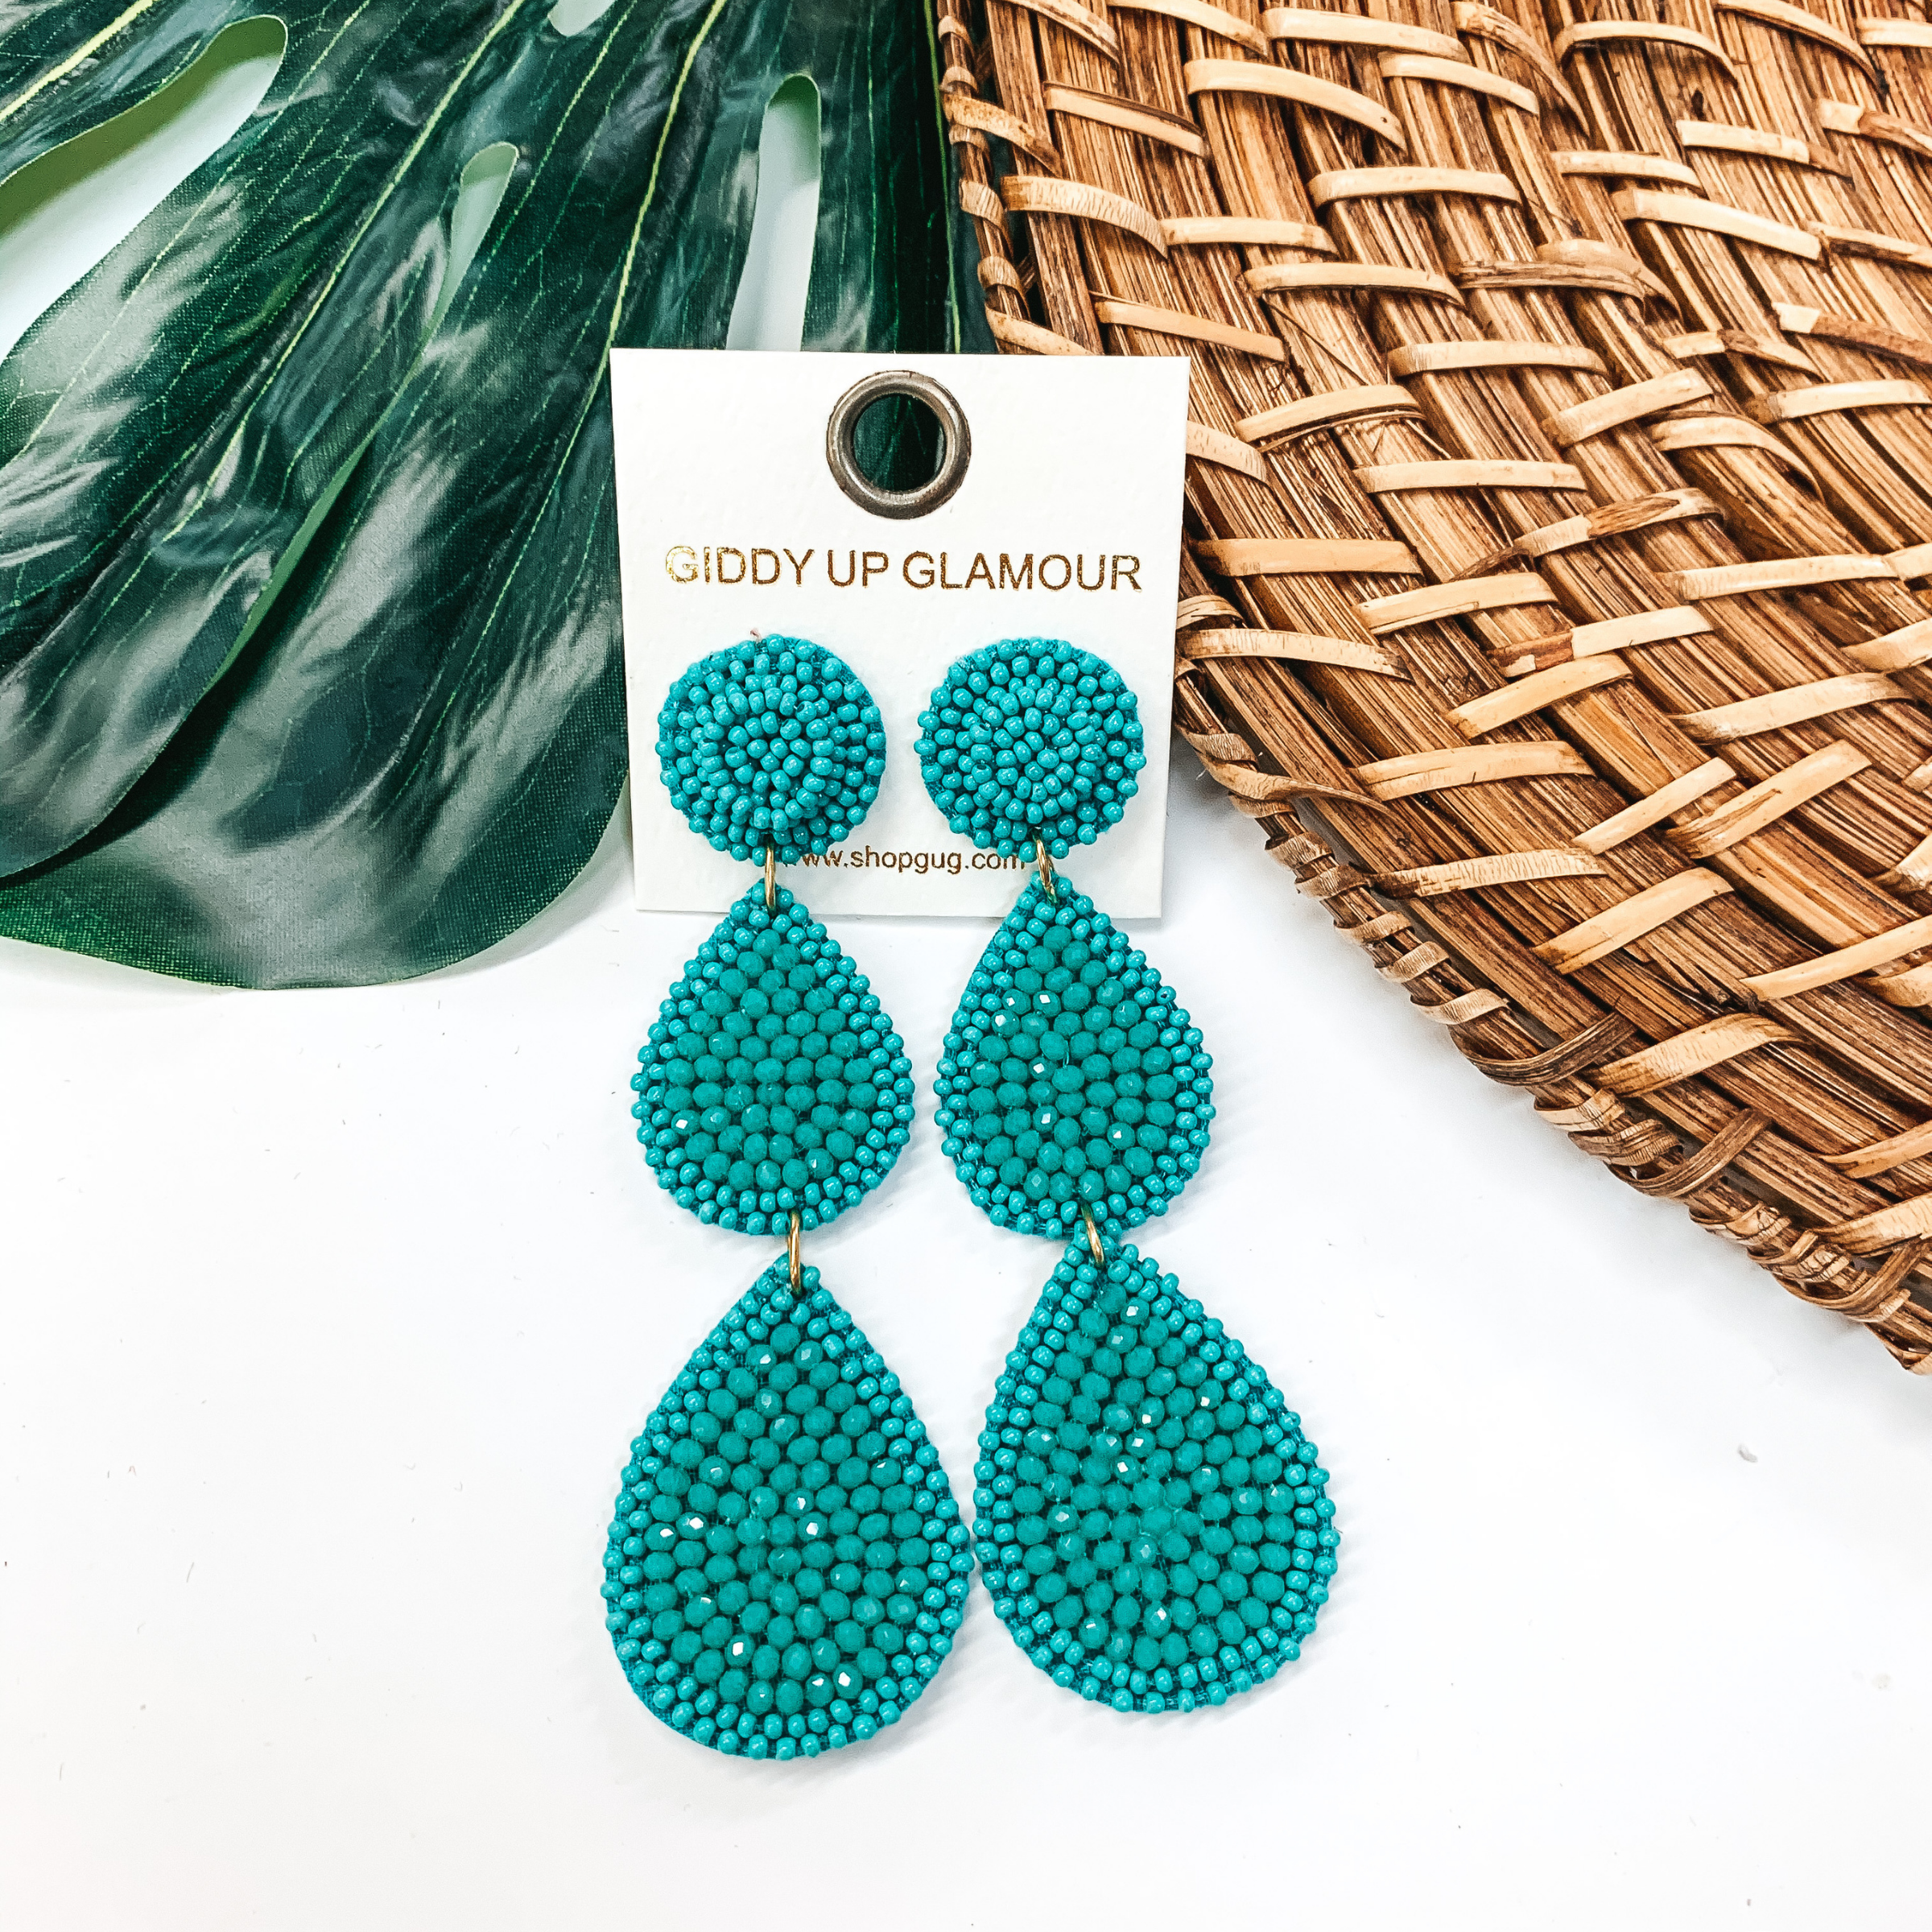 Glass Seed Beaded Drop Earrings in Turquoise - Giddy Up Glamour Boutique